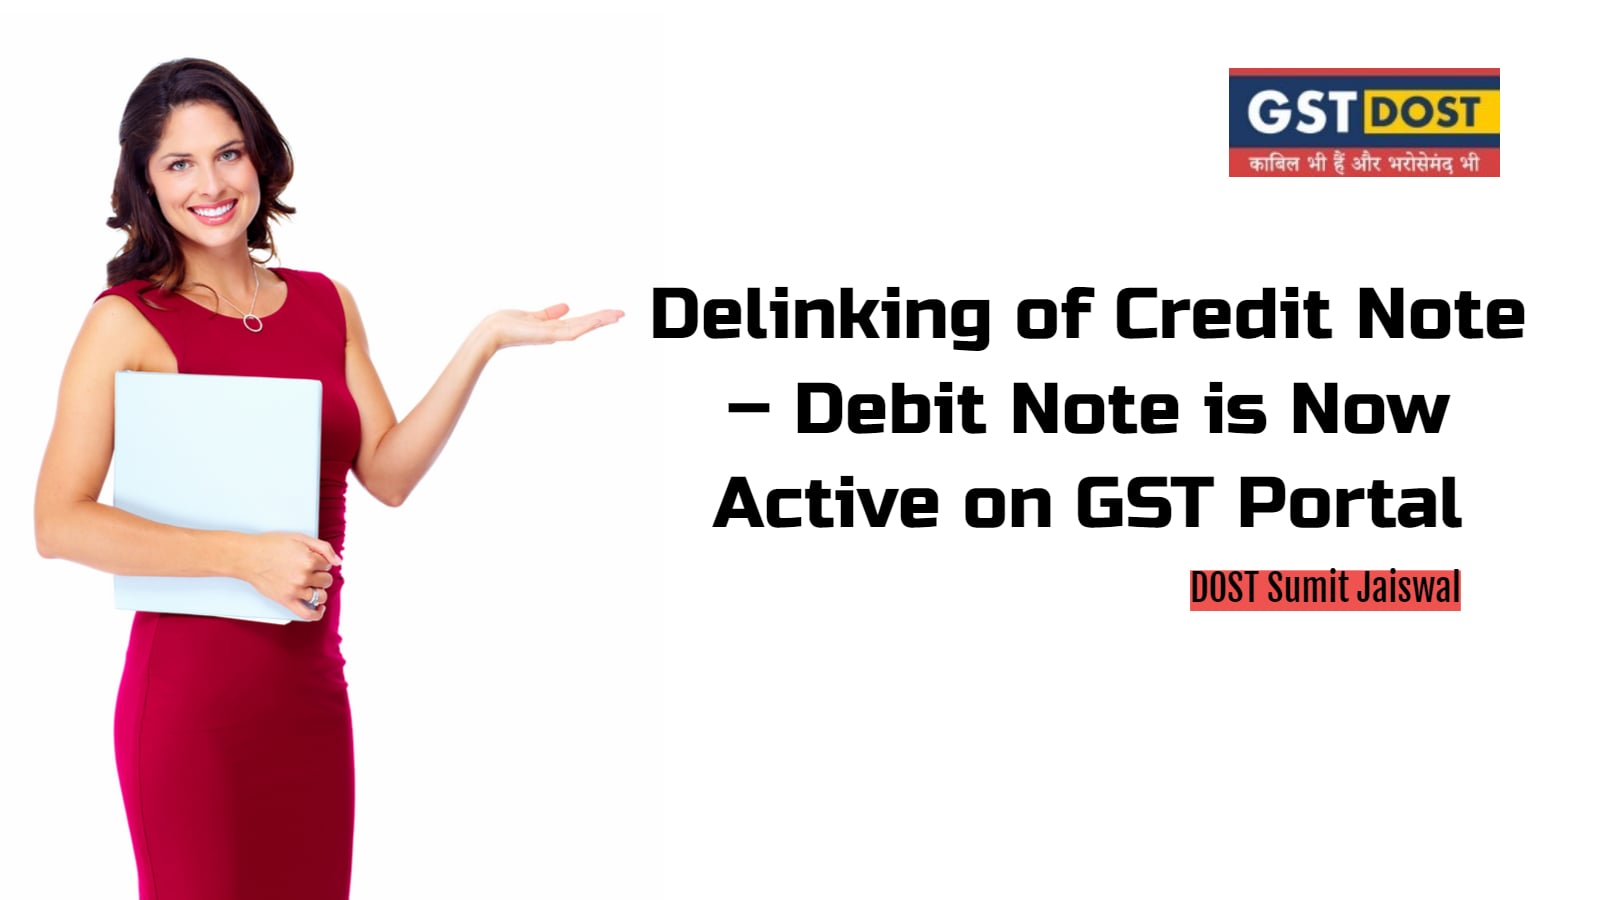 Delinking of Credit Note Debit Note is Now Active on GST Portal